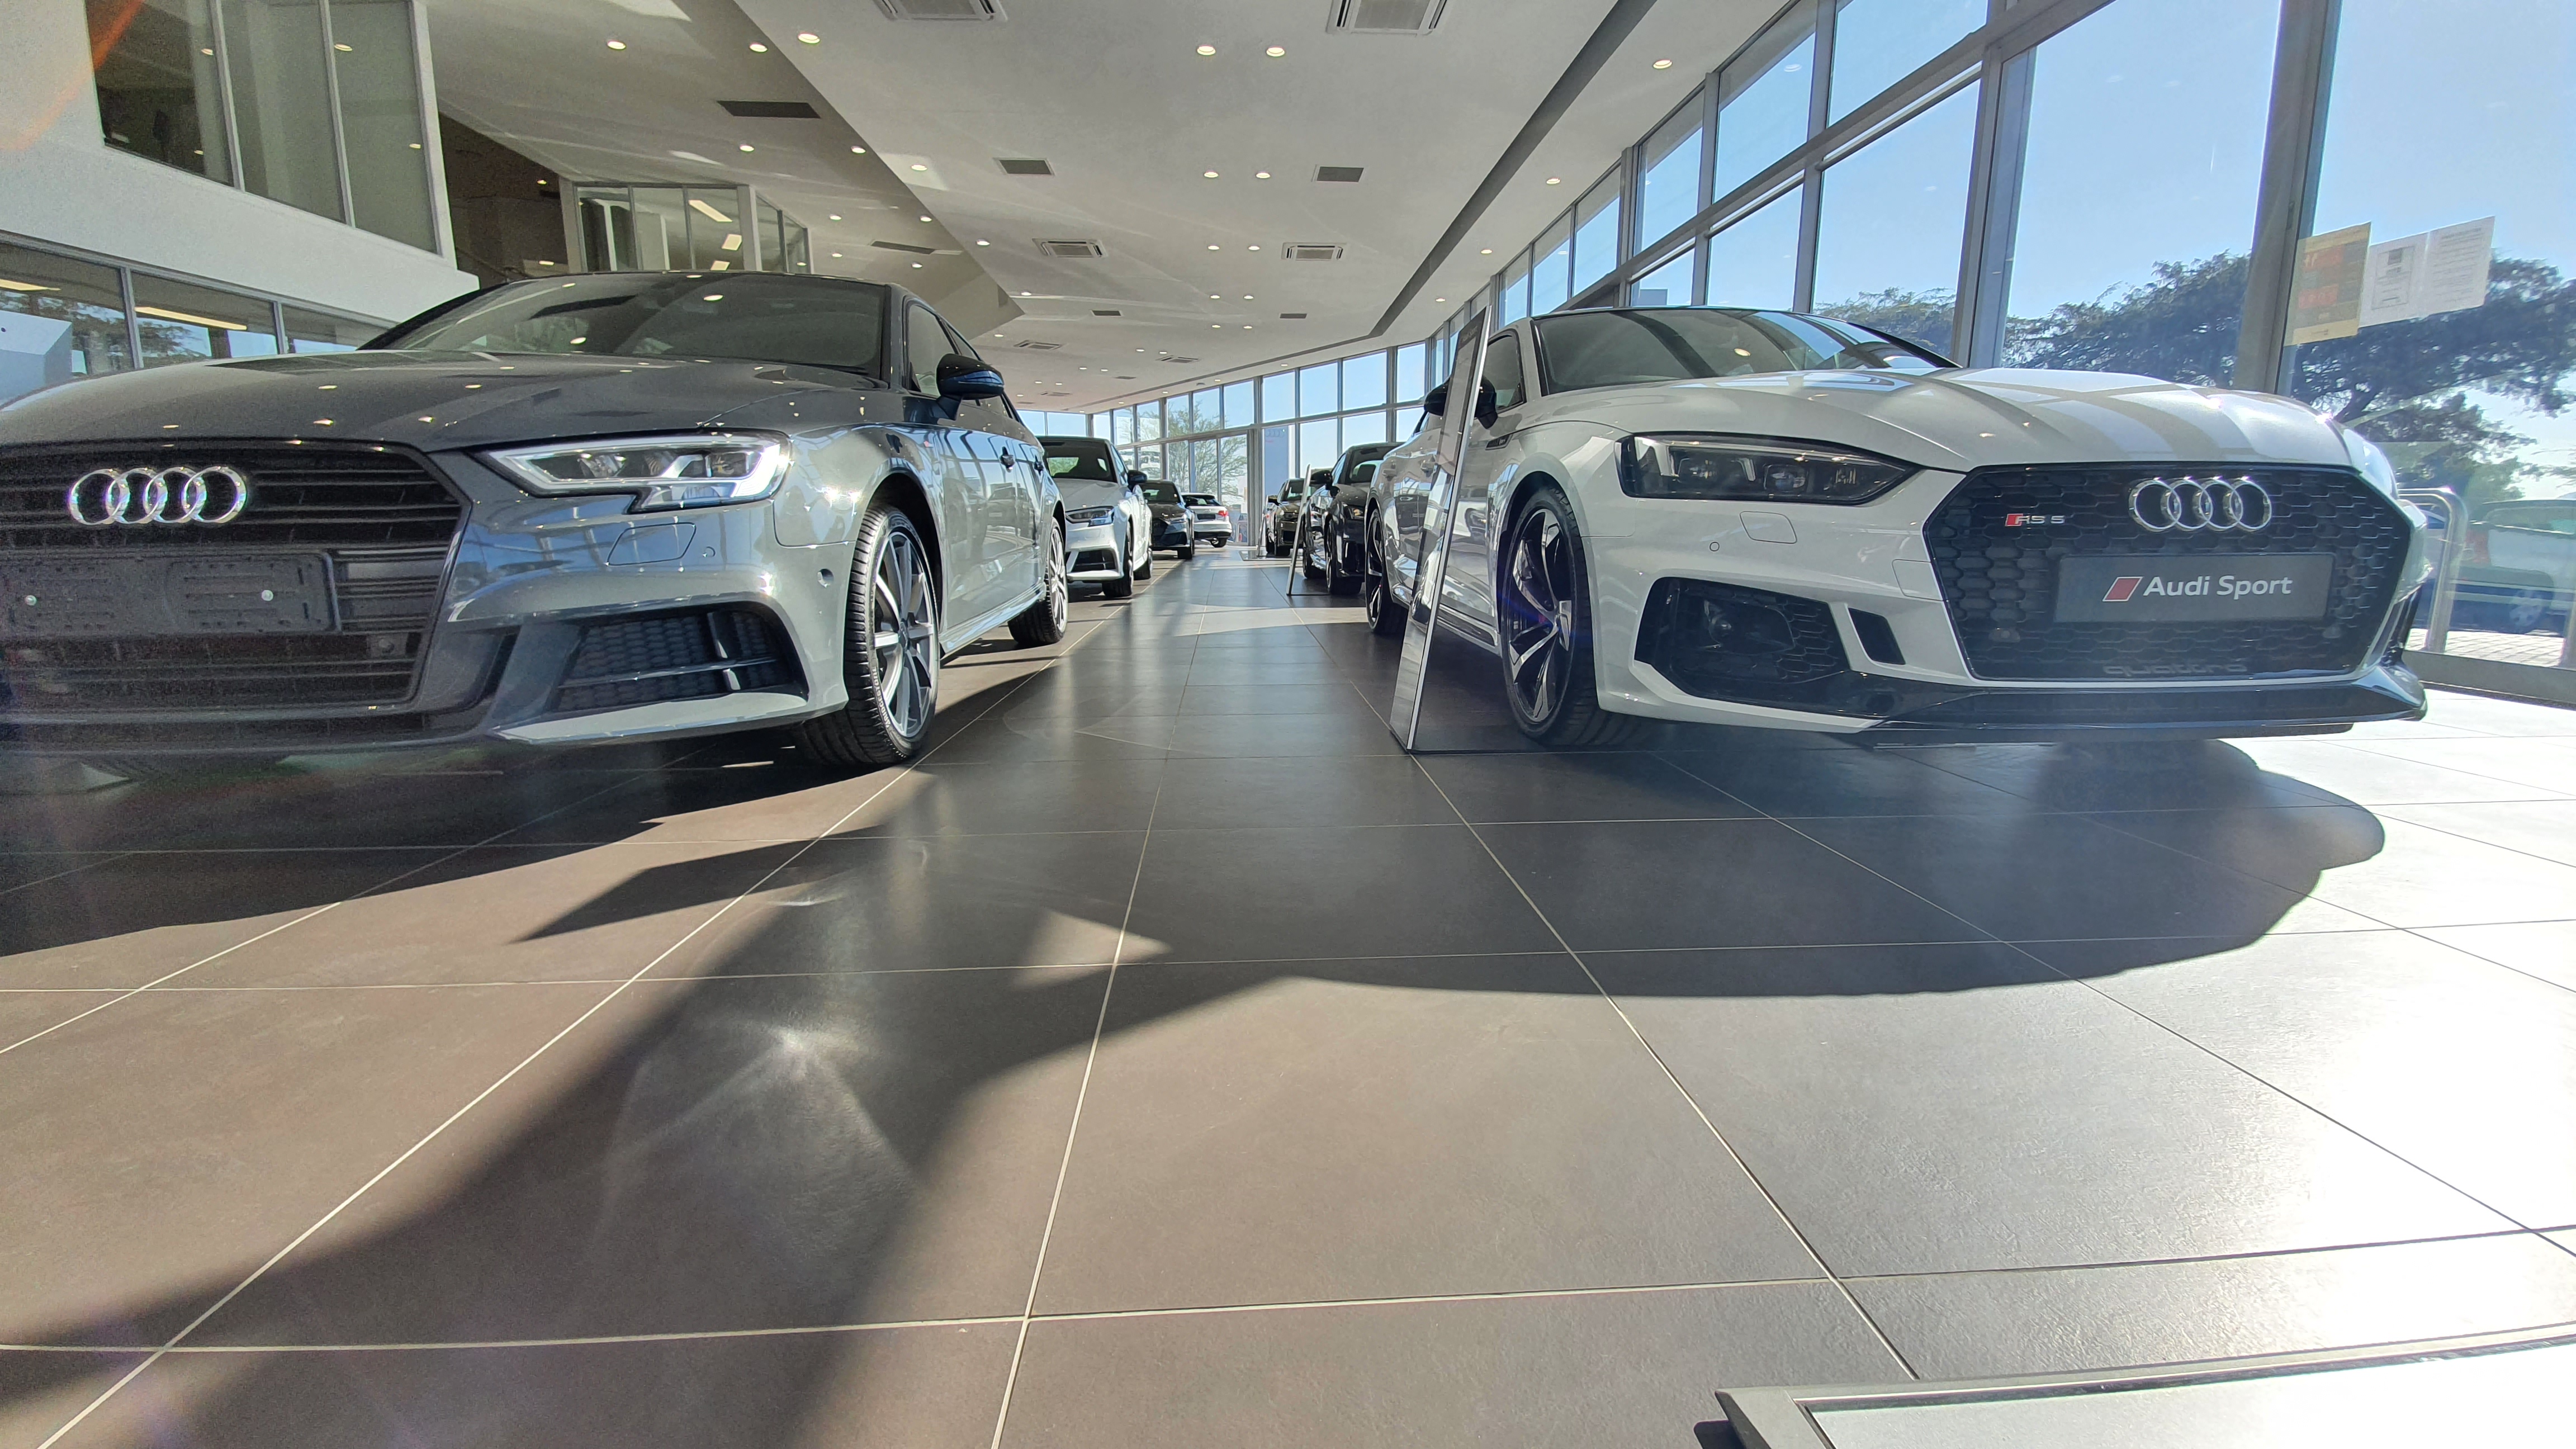 MAPEI Products used at Audi Dealership